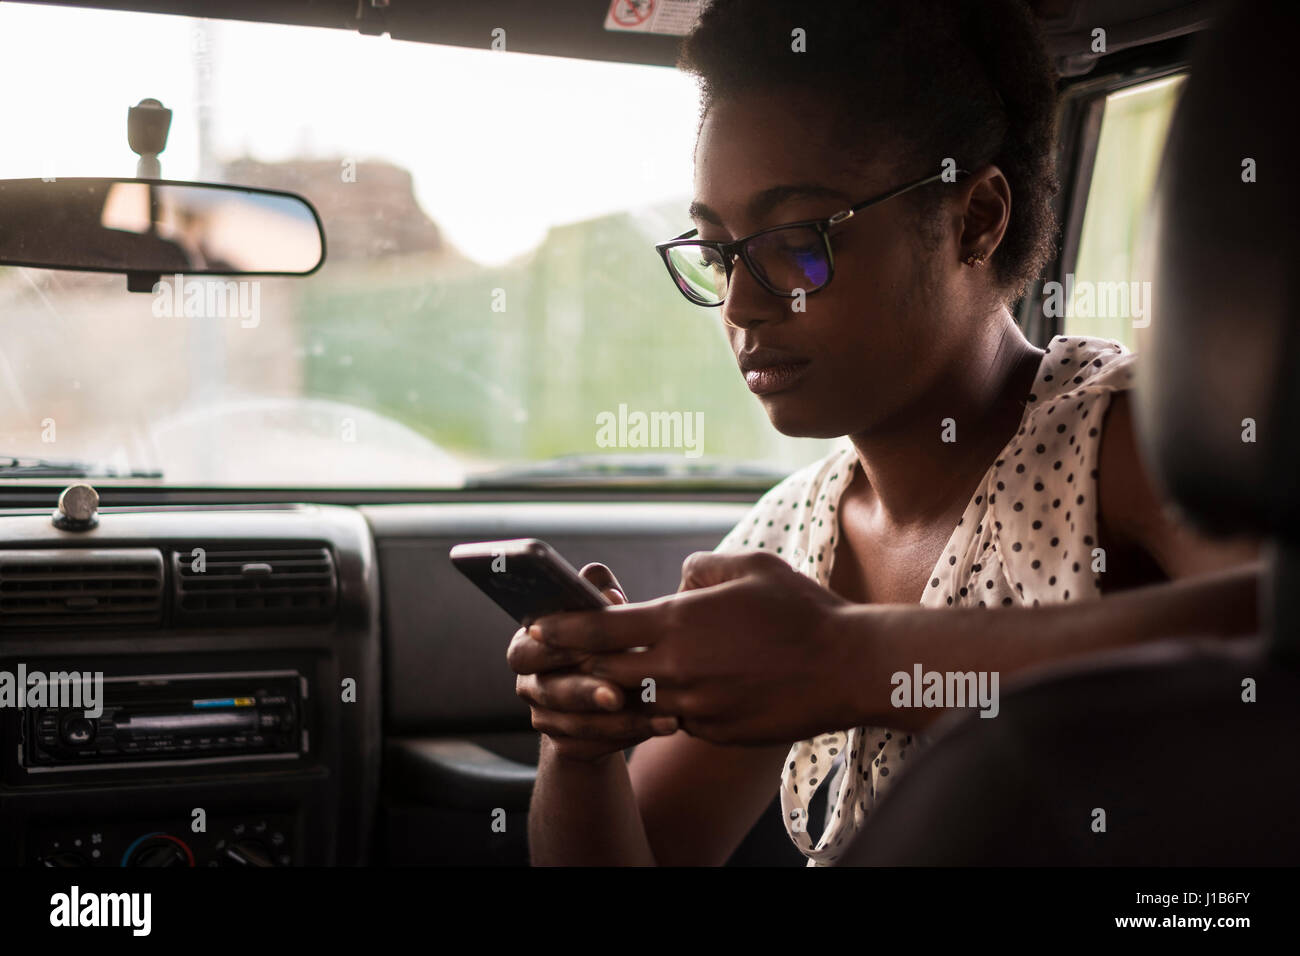 Serious African American woman texting on cell phone in car Stock Photo